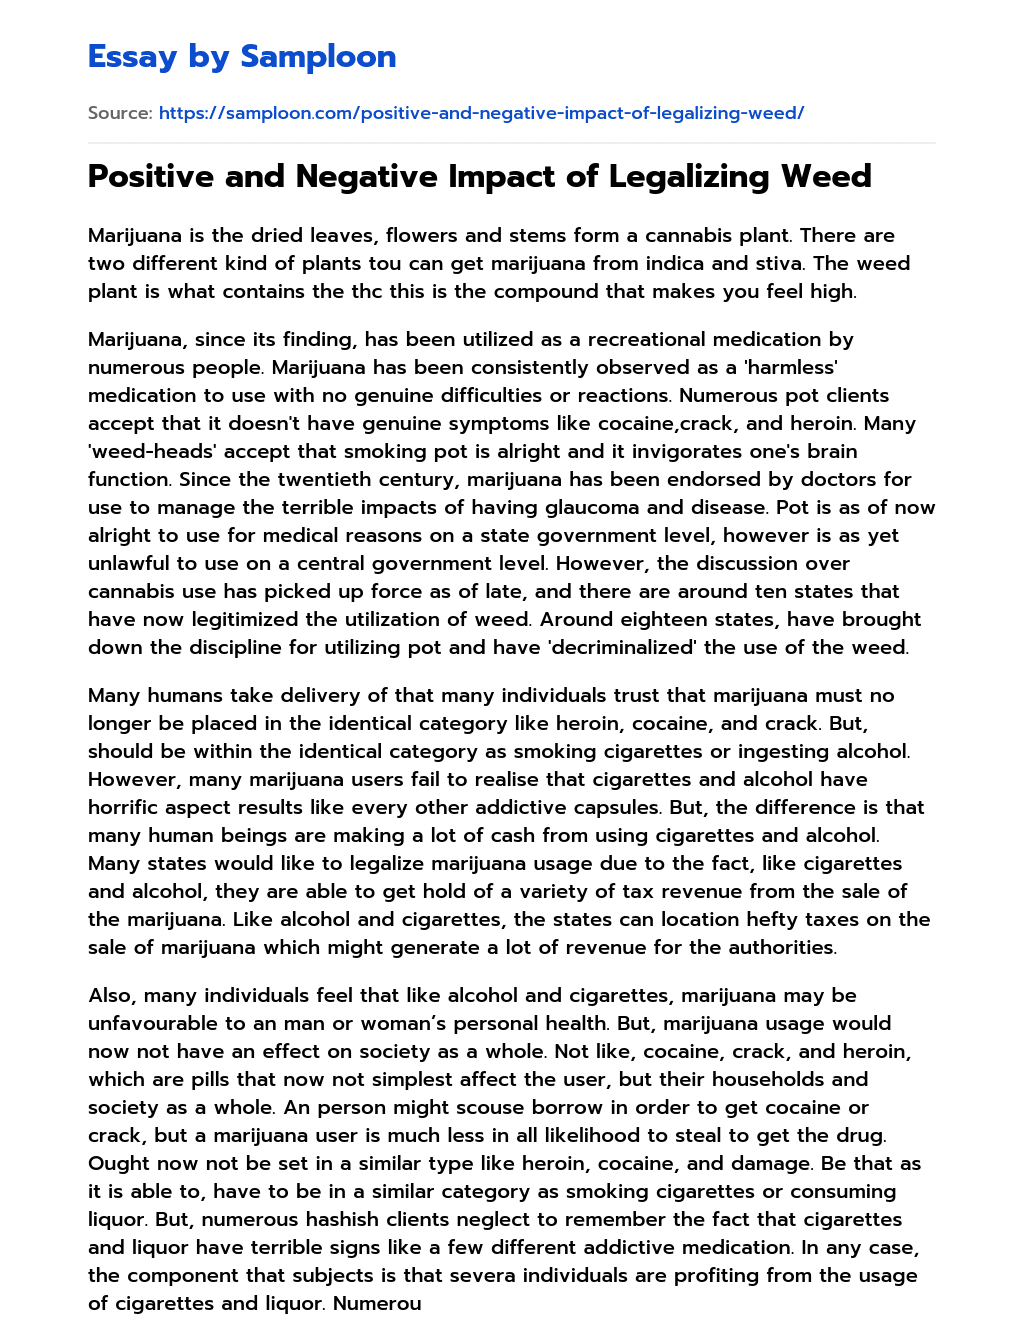 Positive and Negative Impact of Legalizing Weed essay